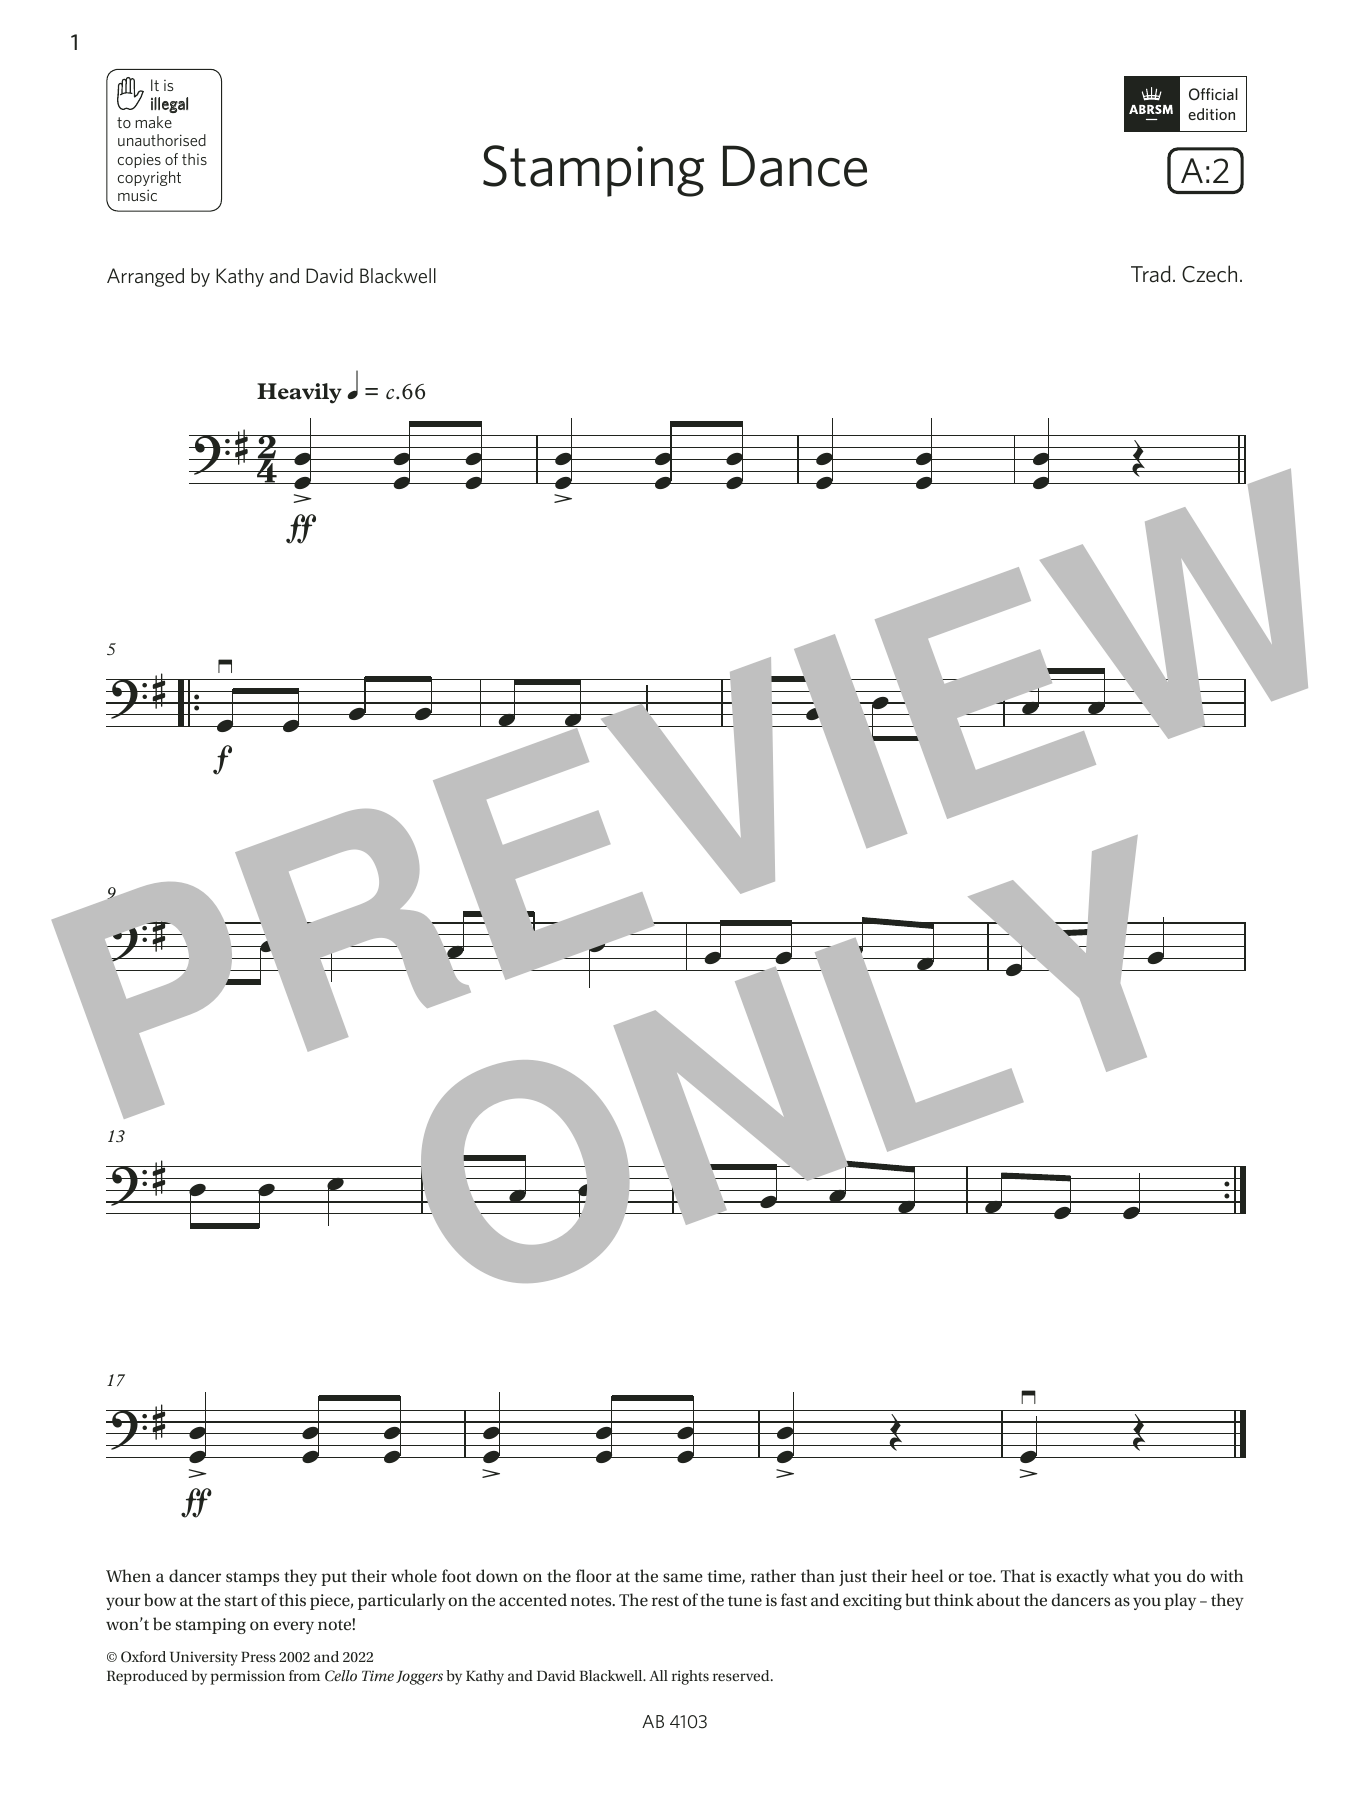 Download Trad. Czech Stamping Dance (Grade Initial, A2, from Sheet Music